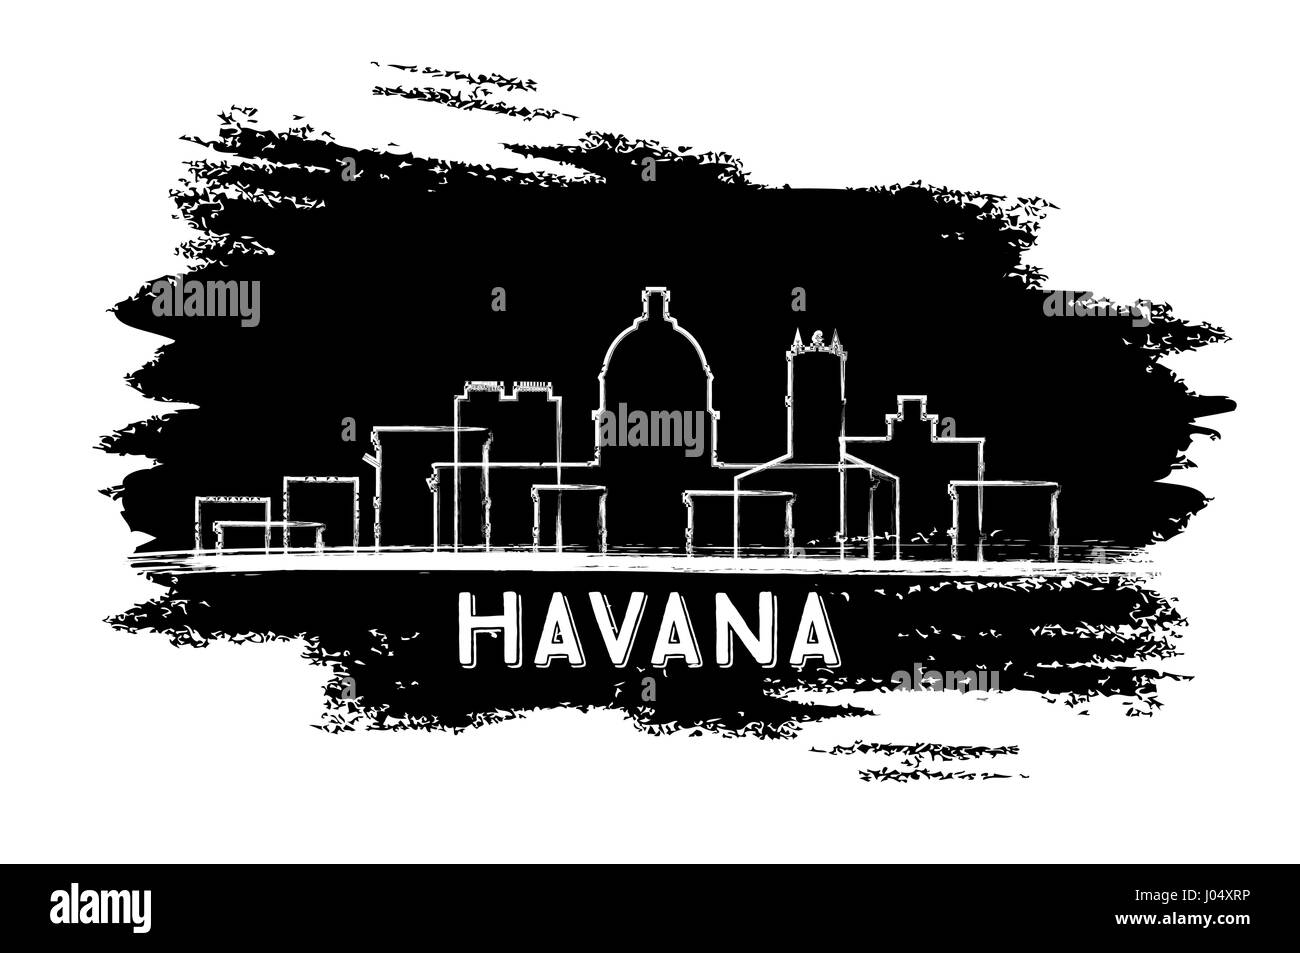 Havana Skyline Silhouette. Hand Drawn Sketch. Business Travel and Tourism Concept with Historic Architecture. Stock Vector